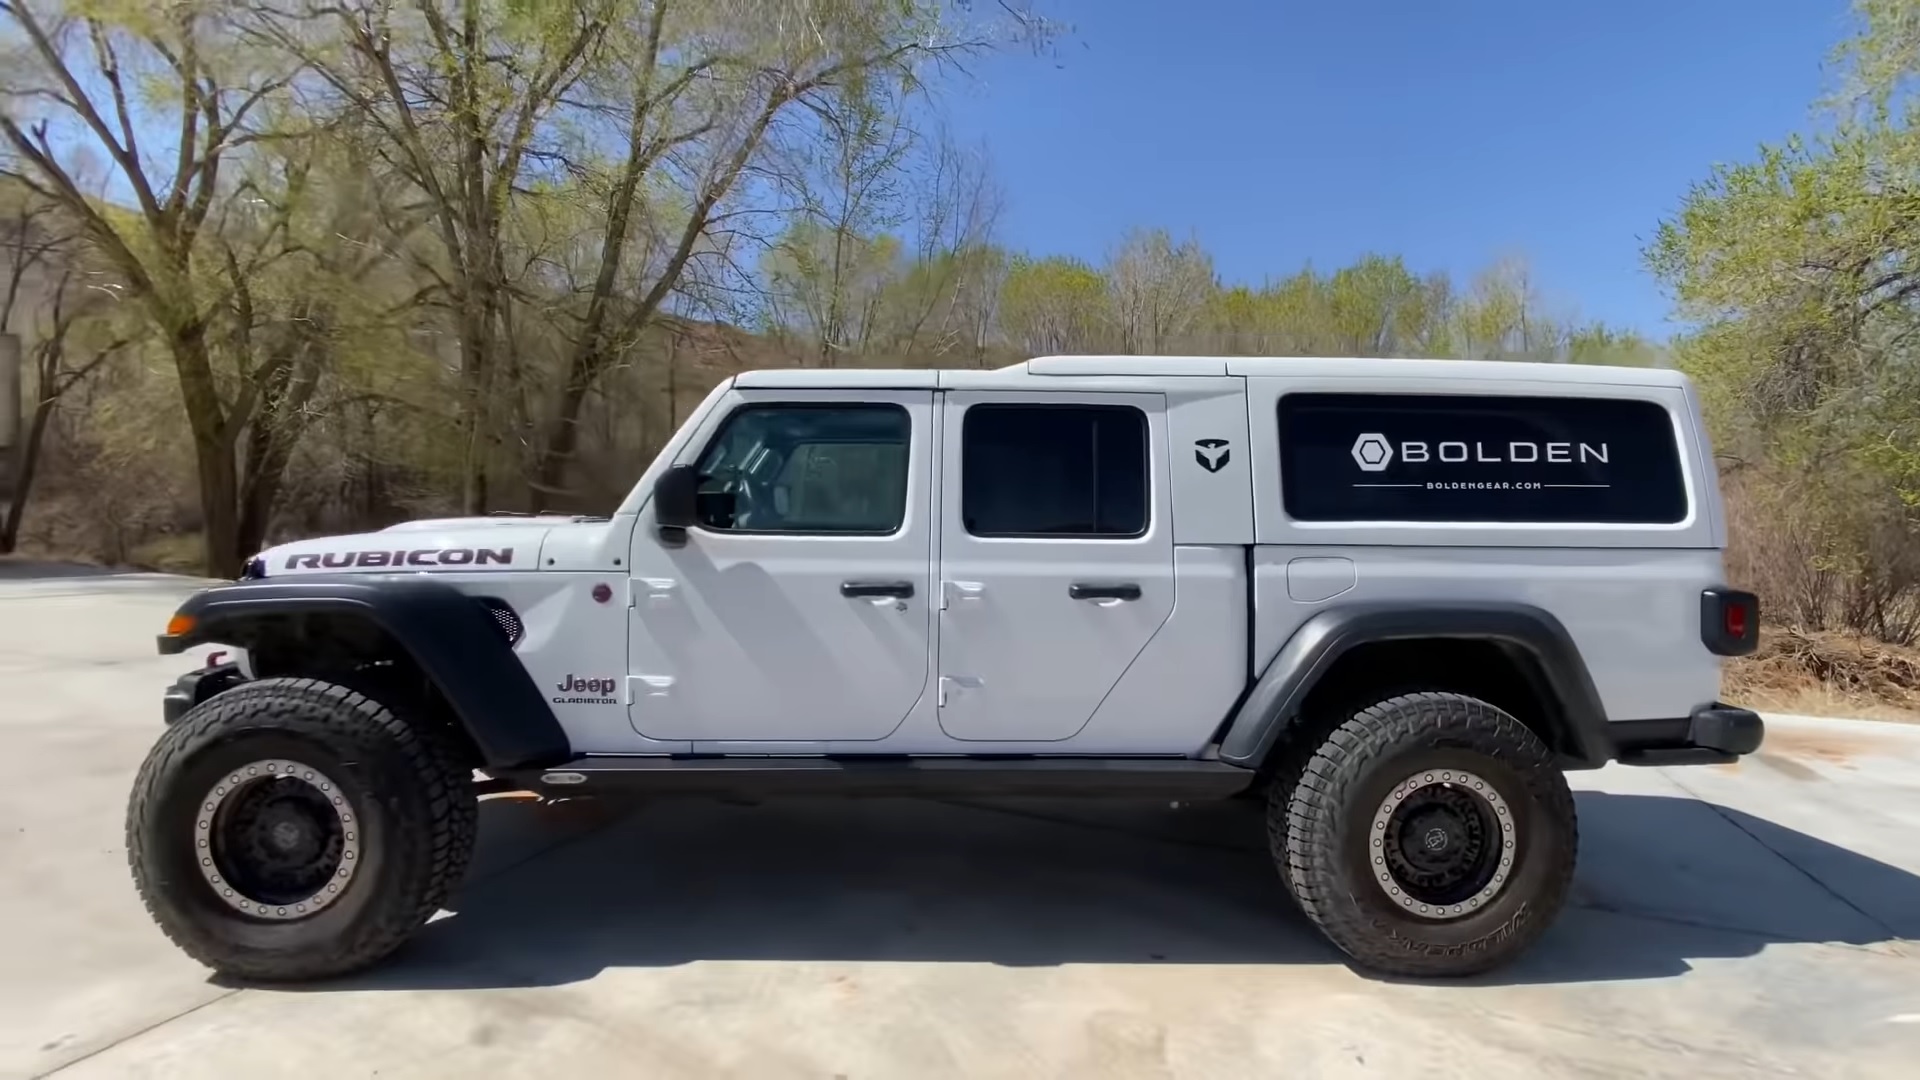 This Seven-Seat Jeep Gladiator Blends OEM Parts With Custom Touches ...